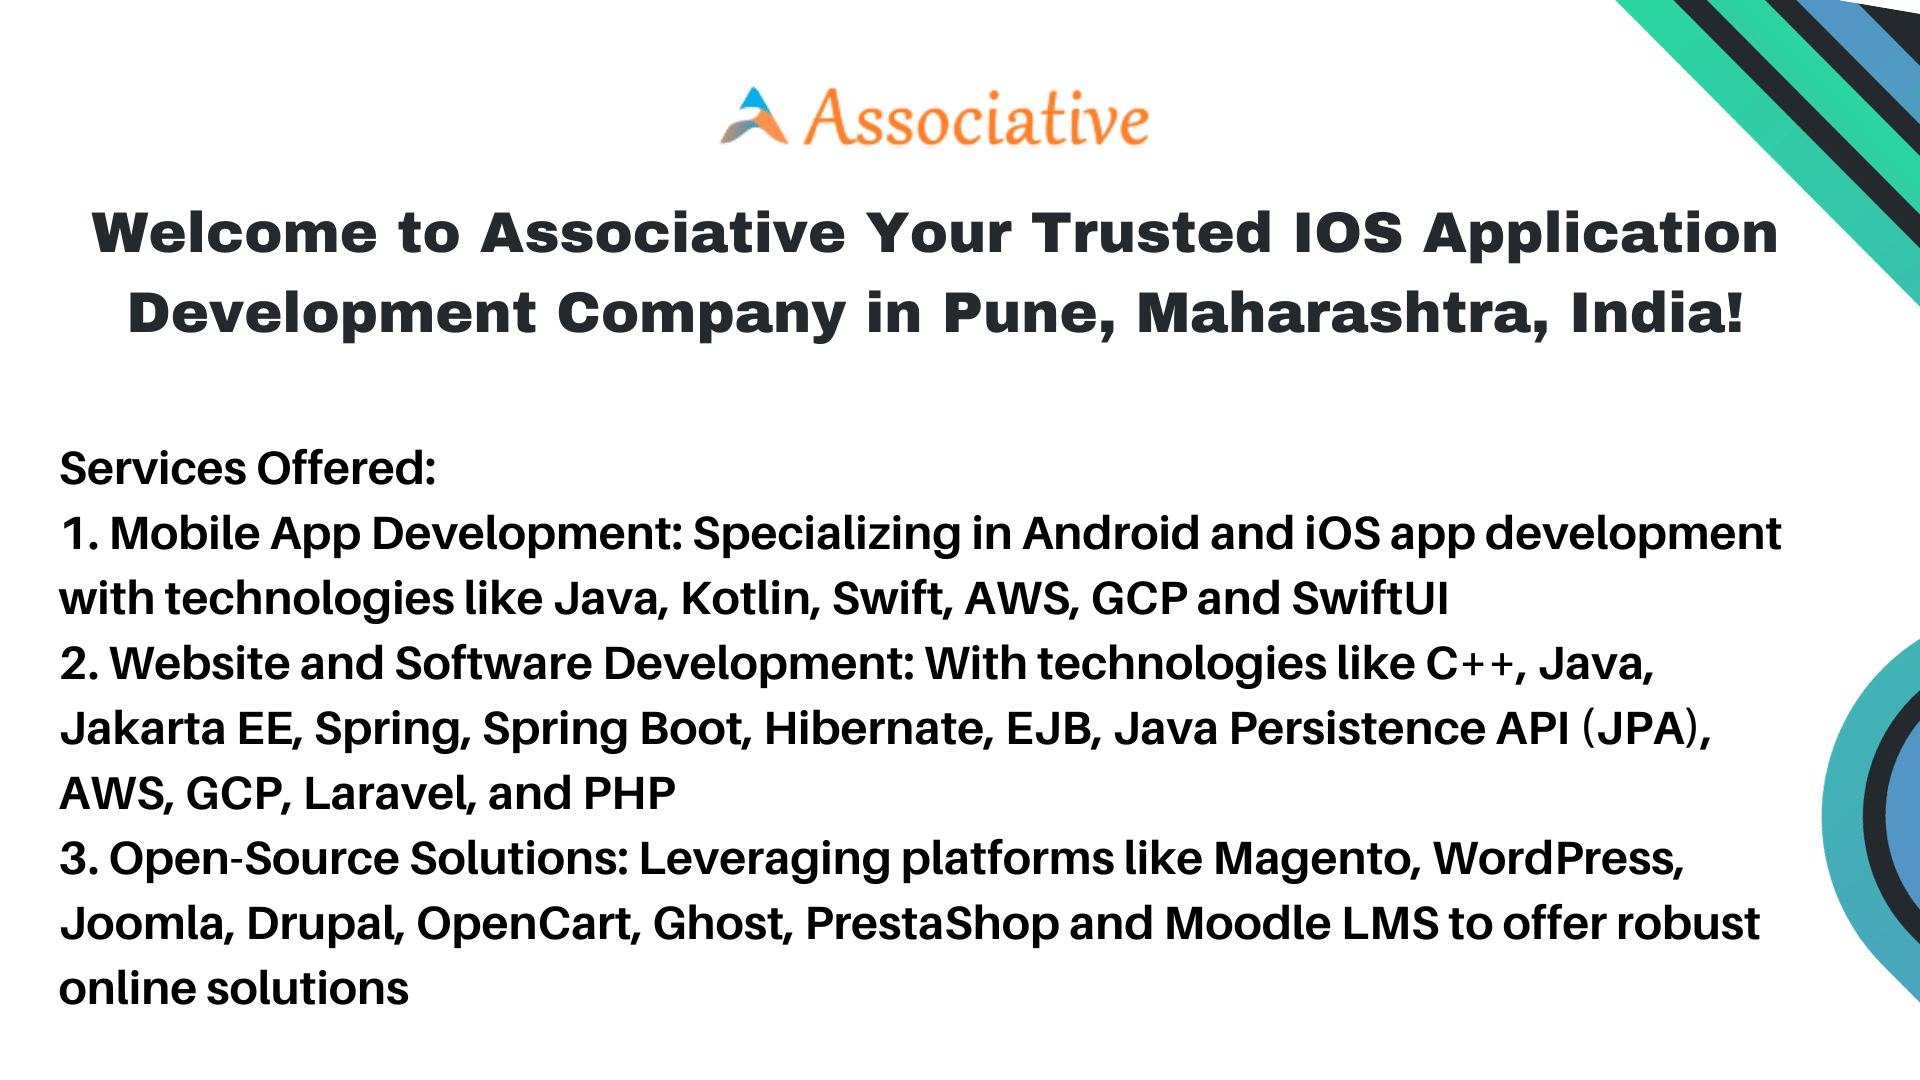 Welcome to Associative Your Trusted IOS Application Development Company in Pune Maharashtra India